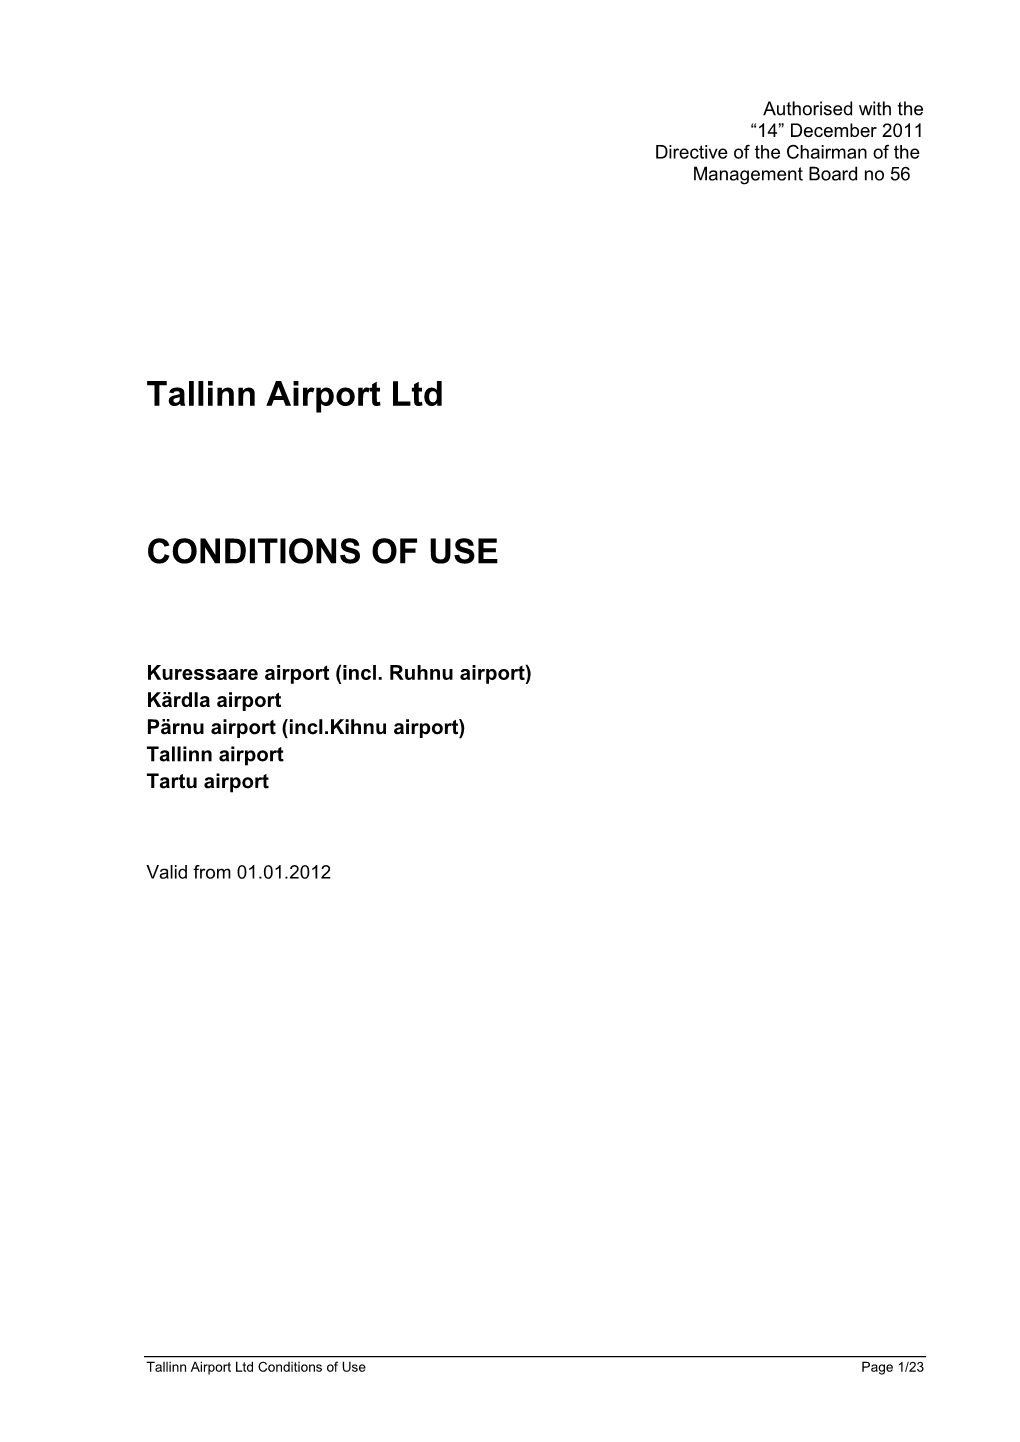 Tallinn Airport Ltd Conditions of Use Page 1/23 Contents 1